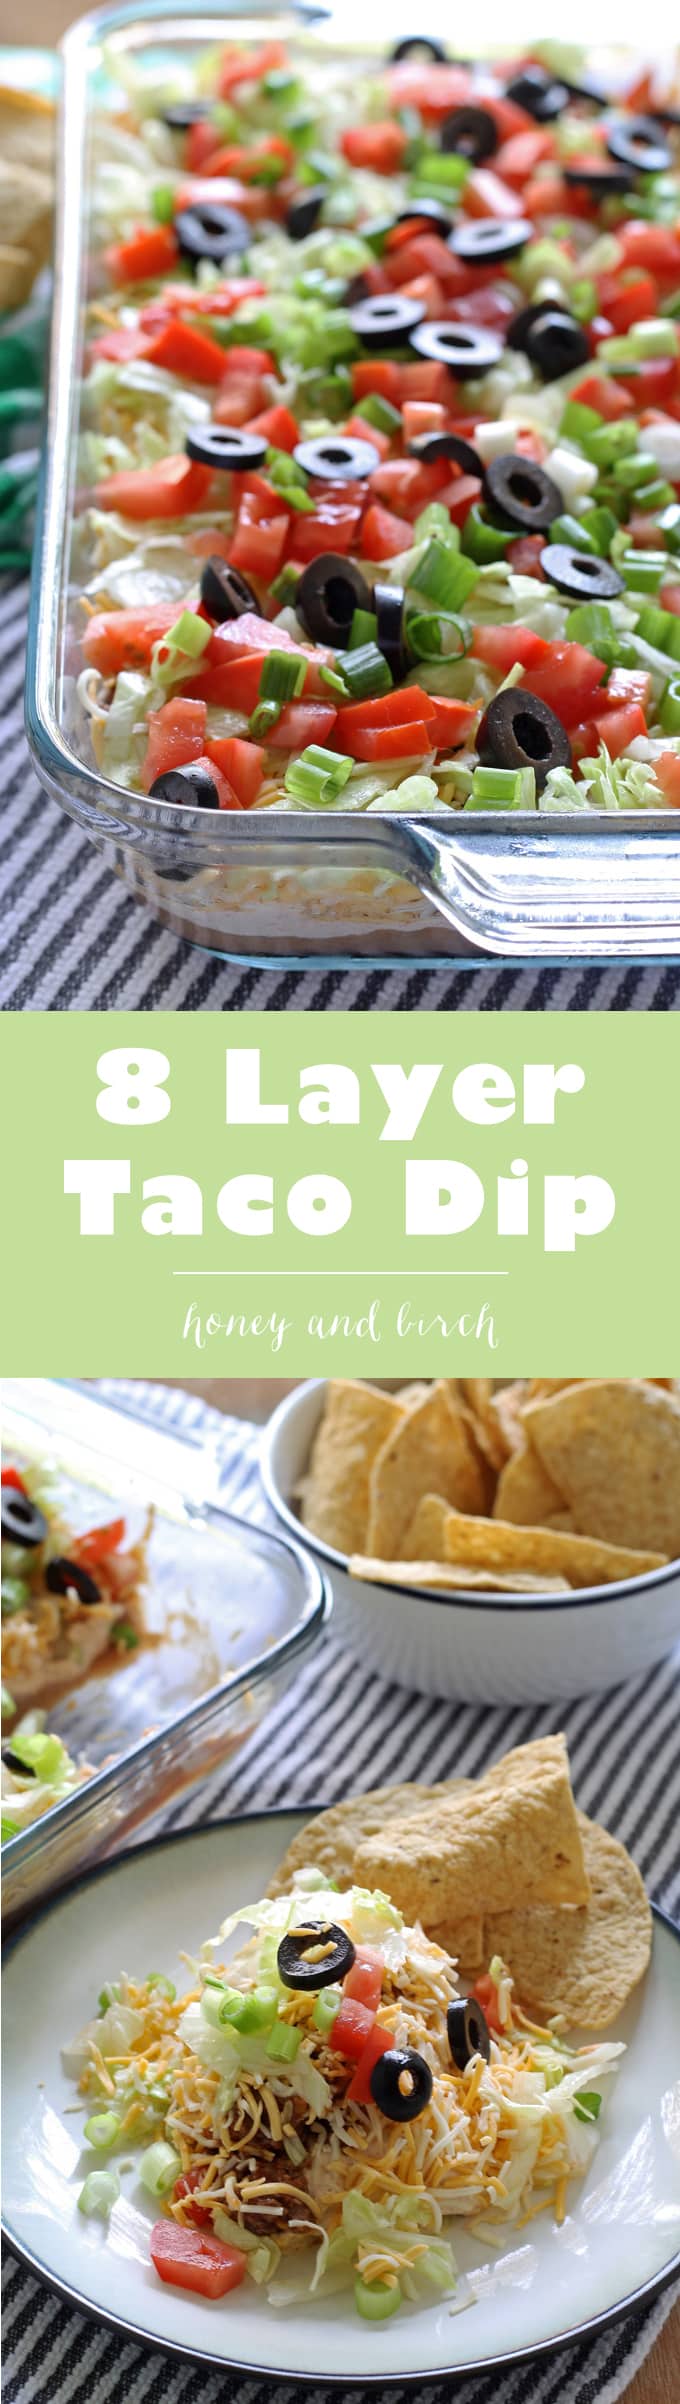 8 Layer Taco Dip Recipe - Perfect for Parties and Tailgating